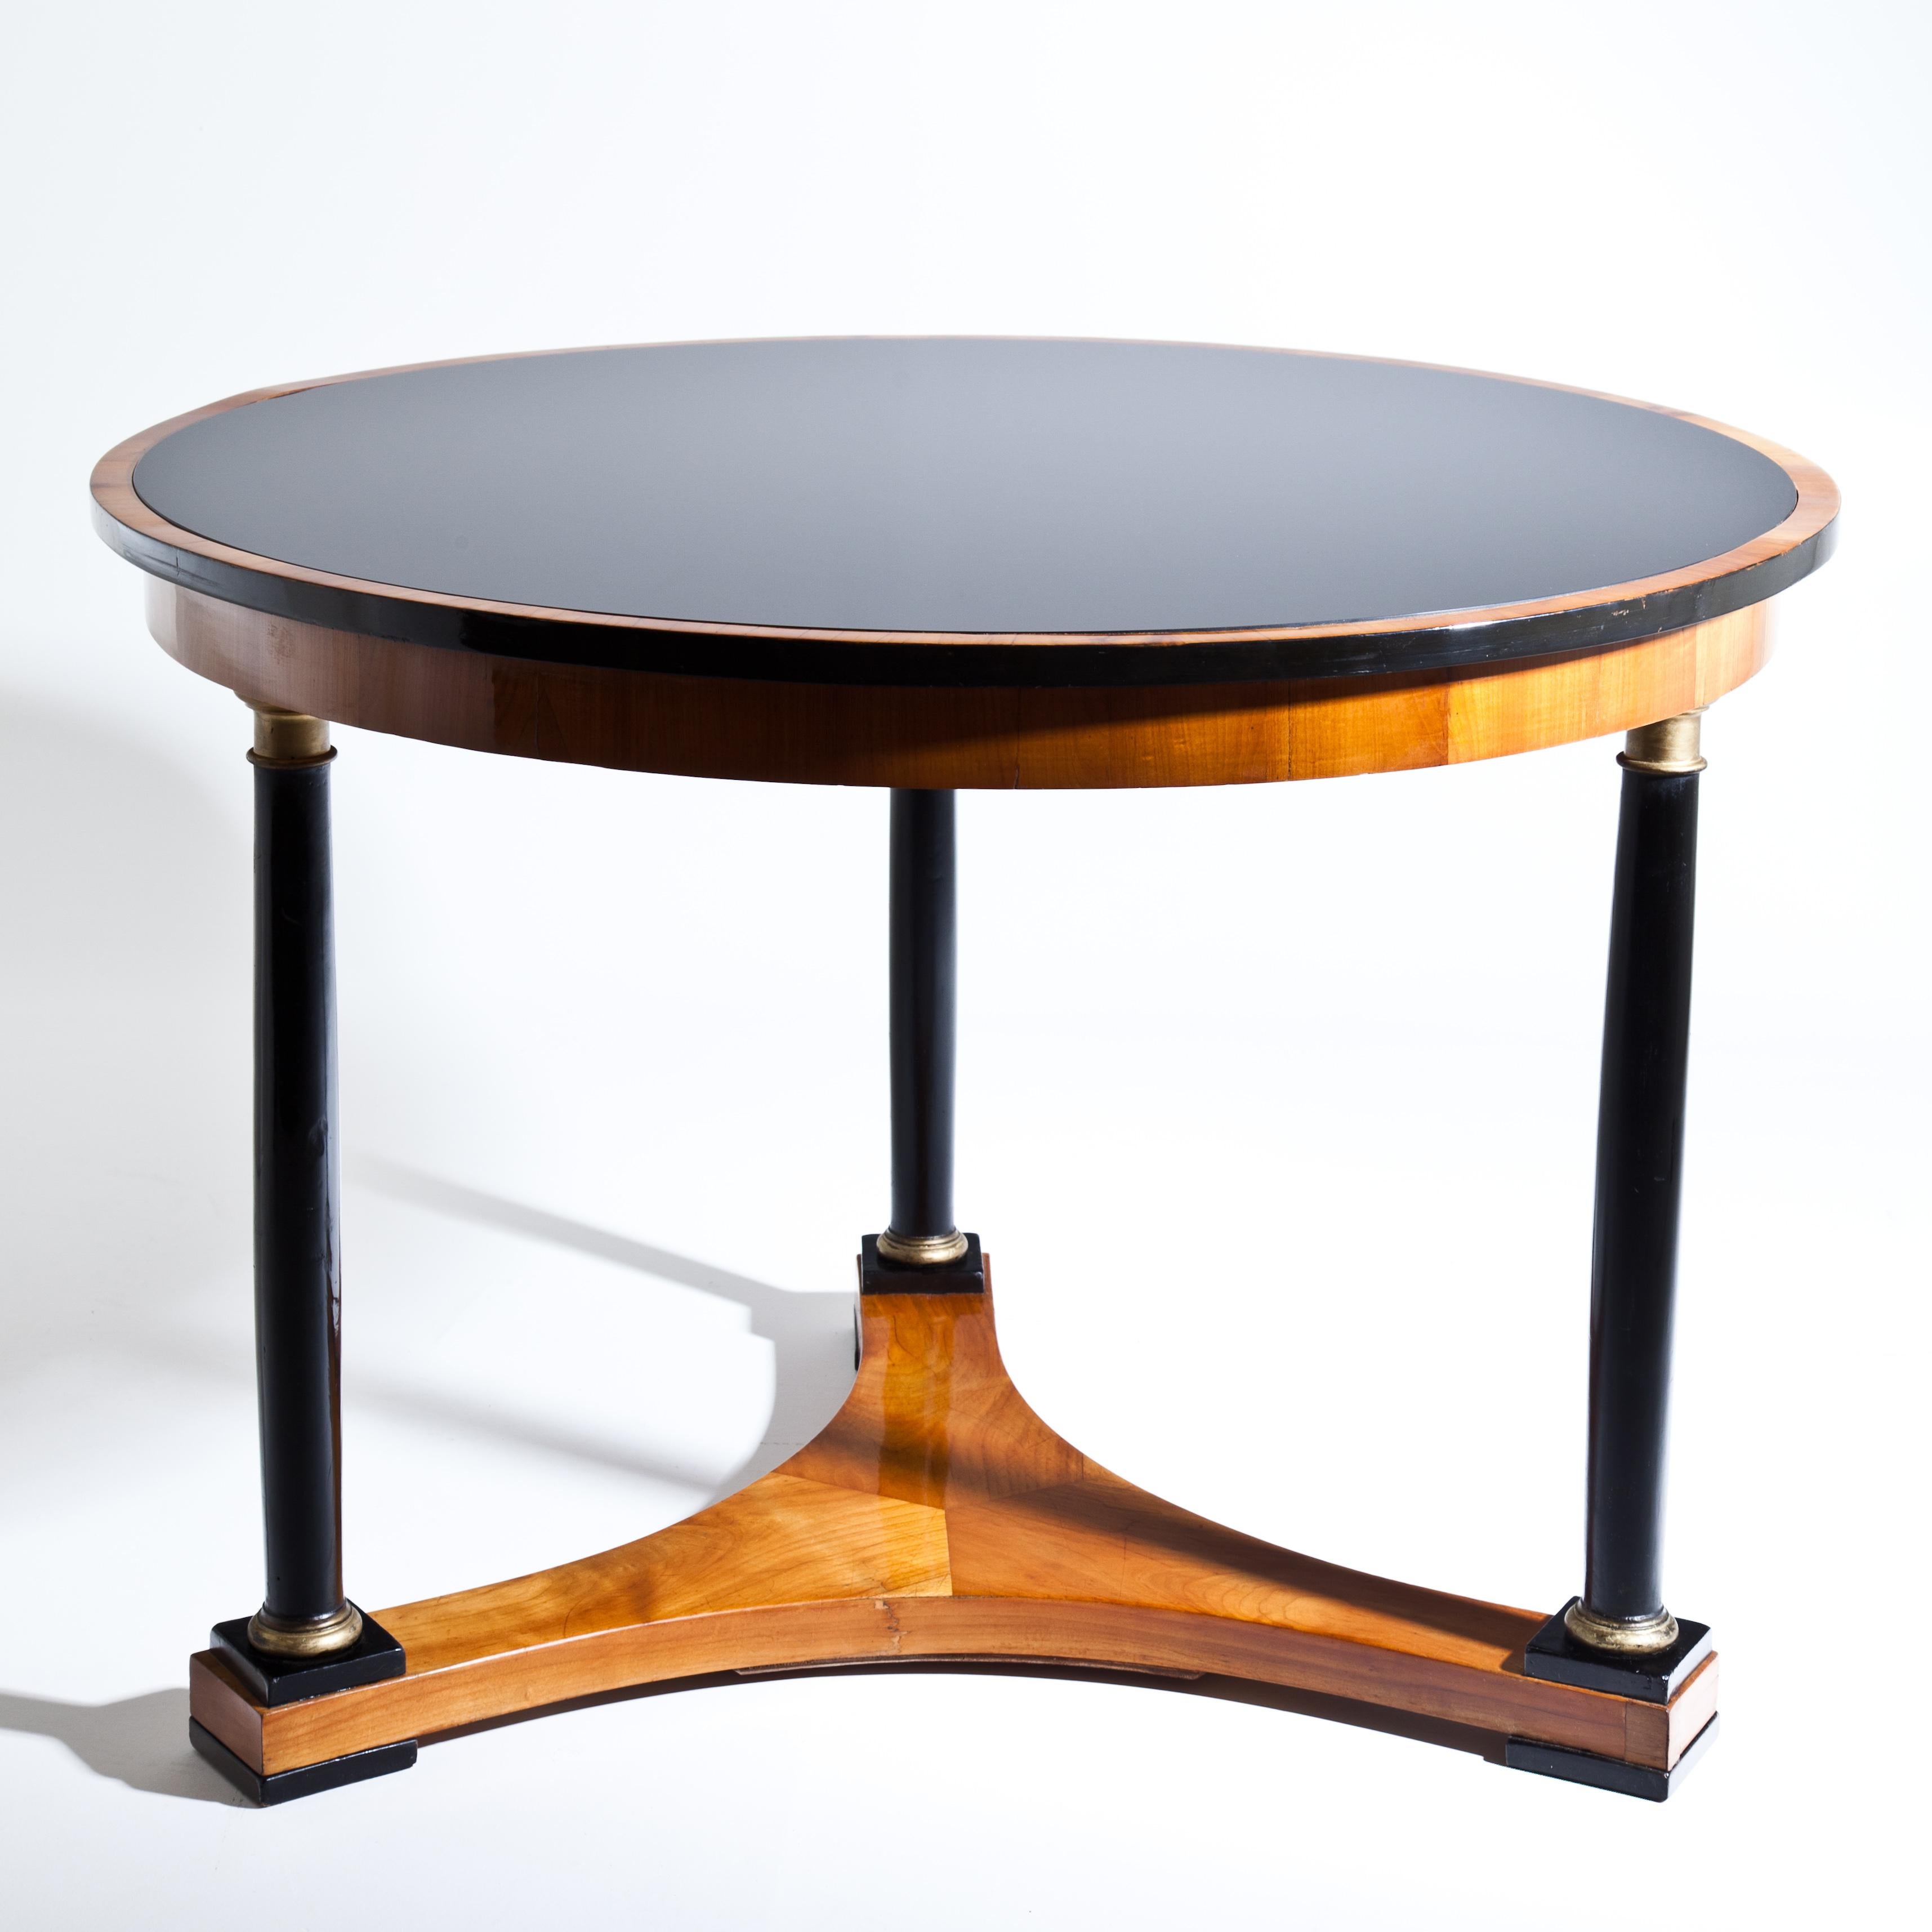 Biedermeier salon table in cherry, with round tabletop on three ebonized and partly gold-patinated column legs above a concave stand. The blackened tabletop with likewise ebonized edge has a recent glass top.